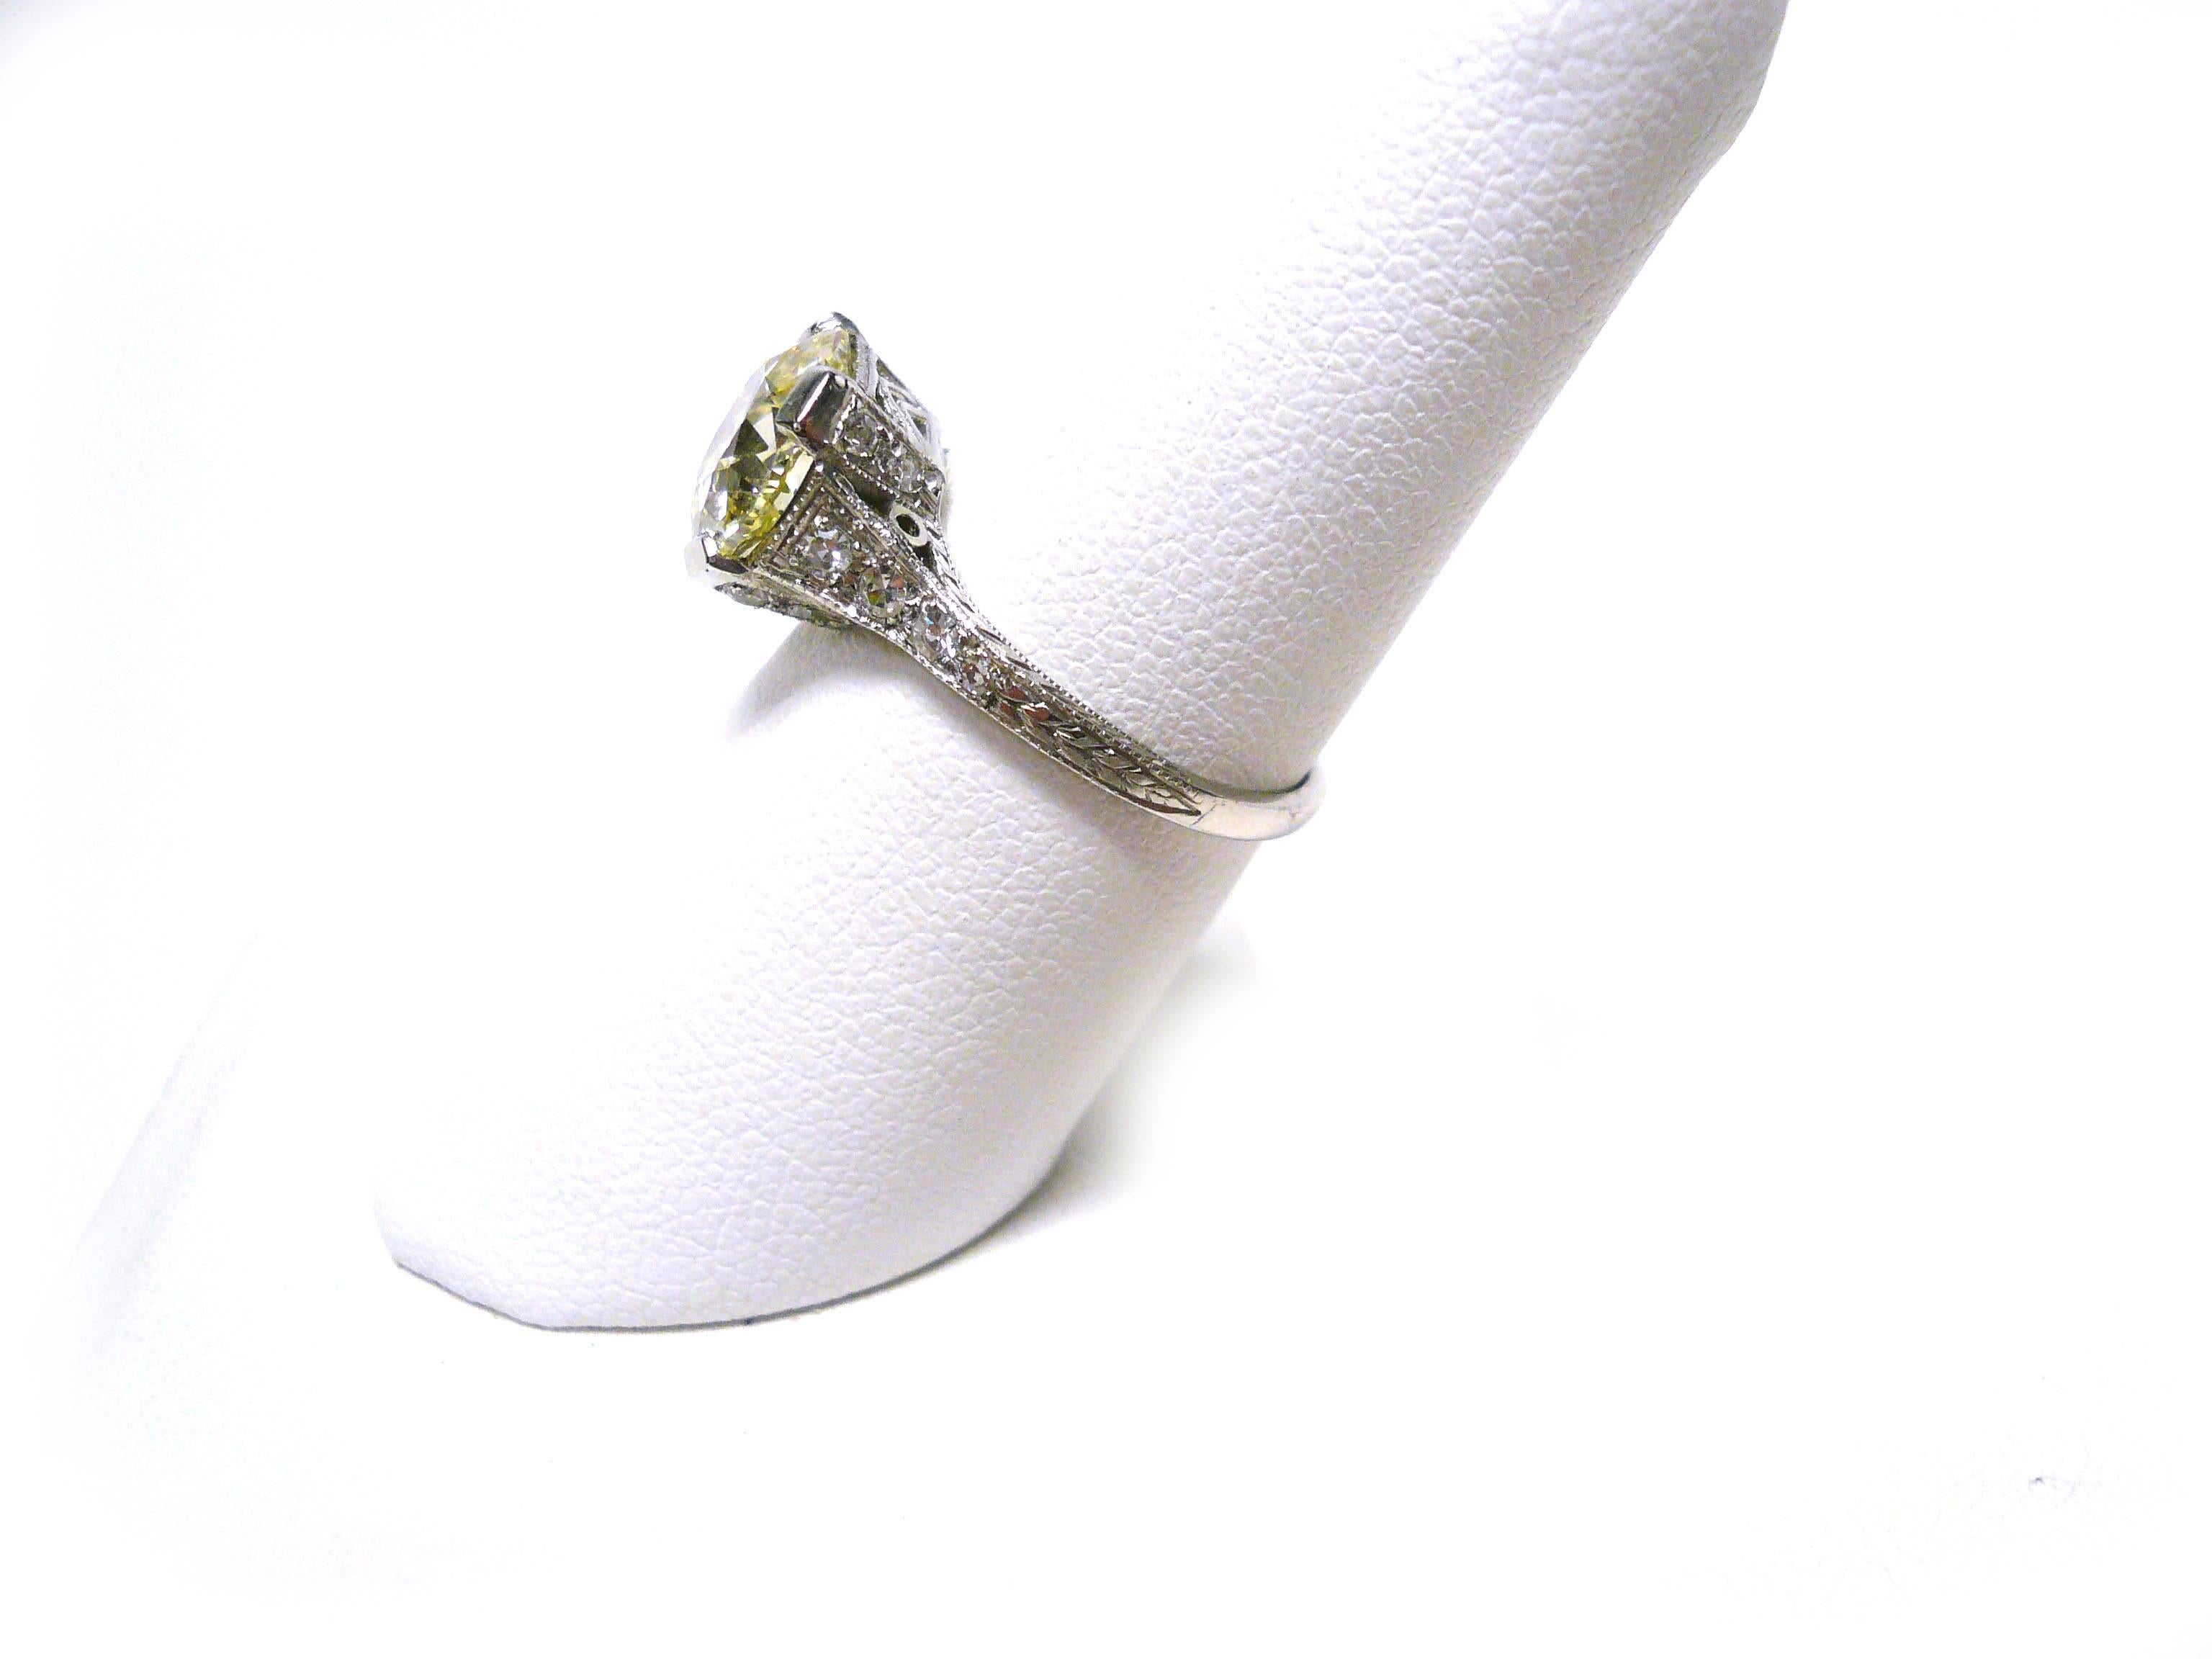 Jazz age babies and society matrons drooled for this platinum diamond ring.
This beauty was not available in the dime store but in the finest shops in Manhattan, Chicago or New Orleans.  Whereever hot jazz played, champagne flowed and no one went